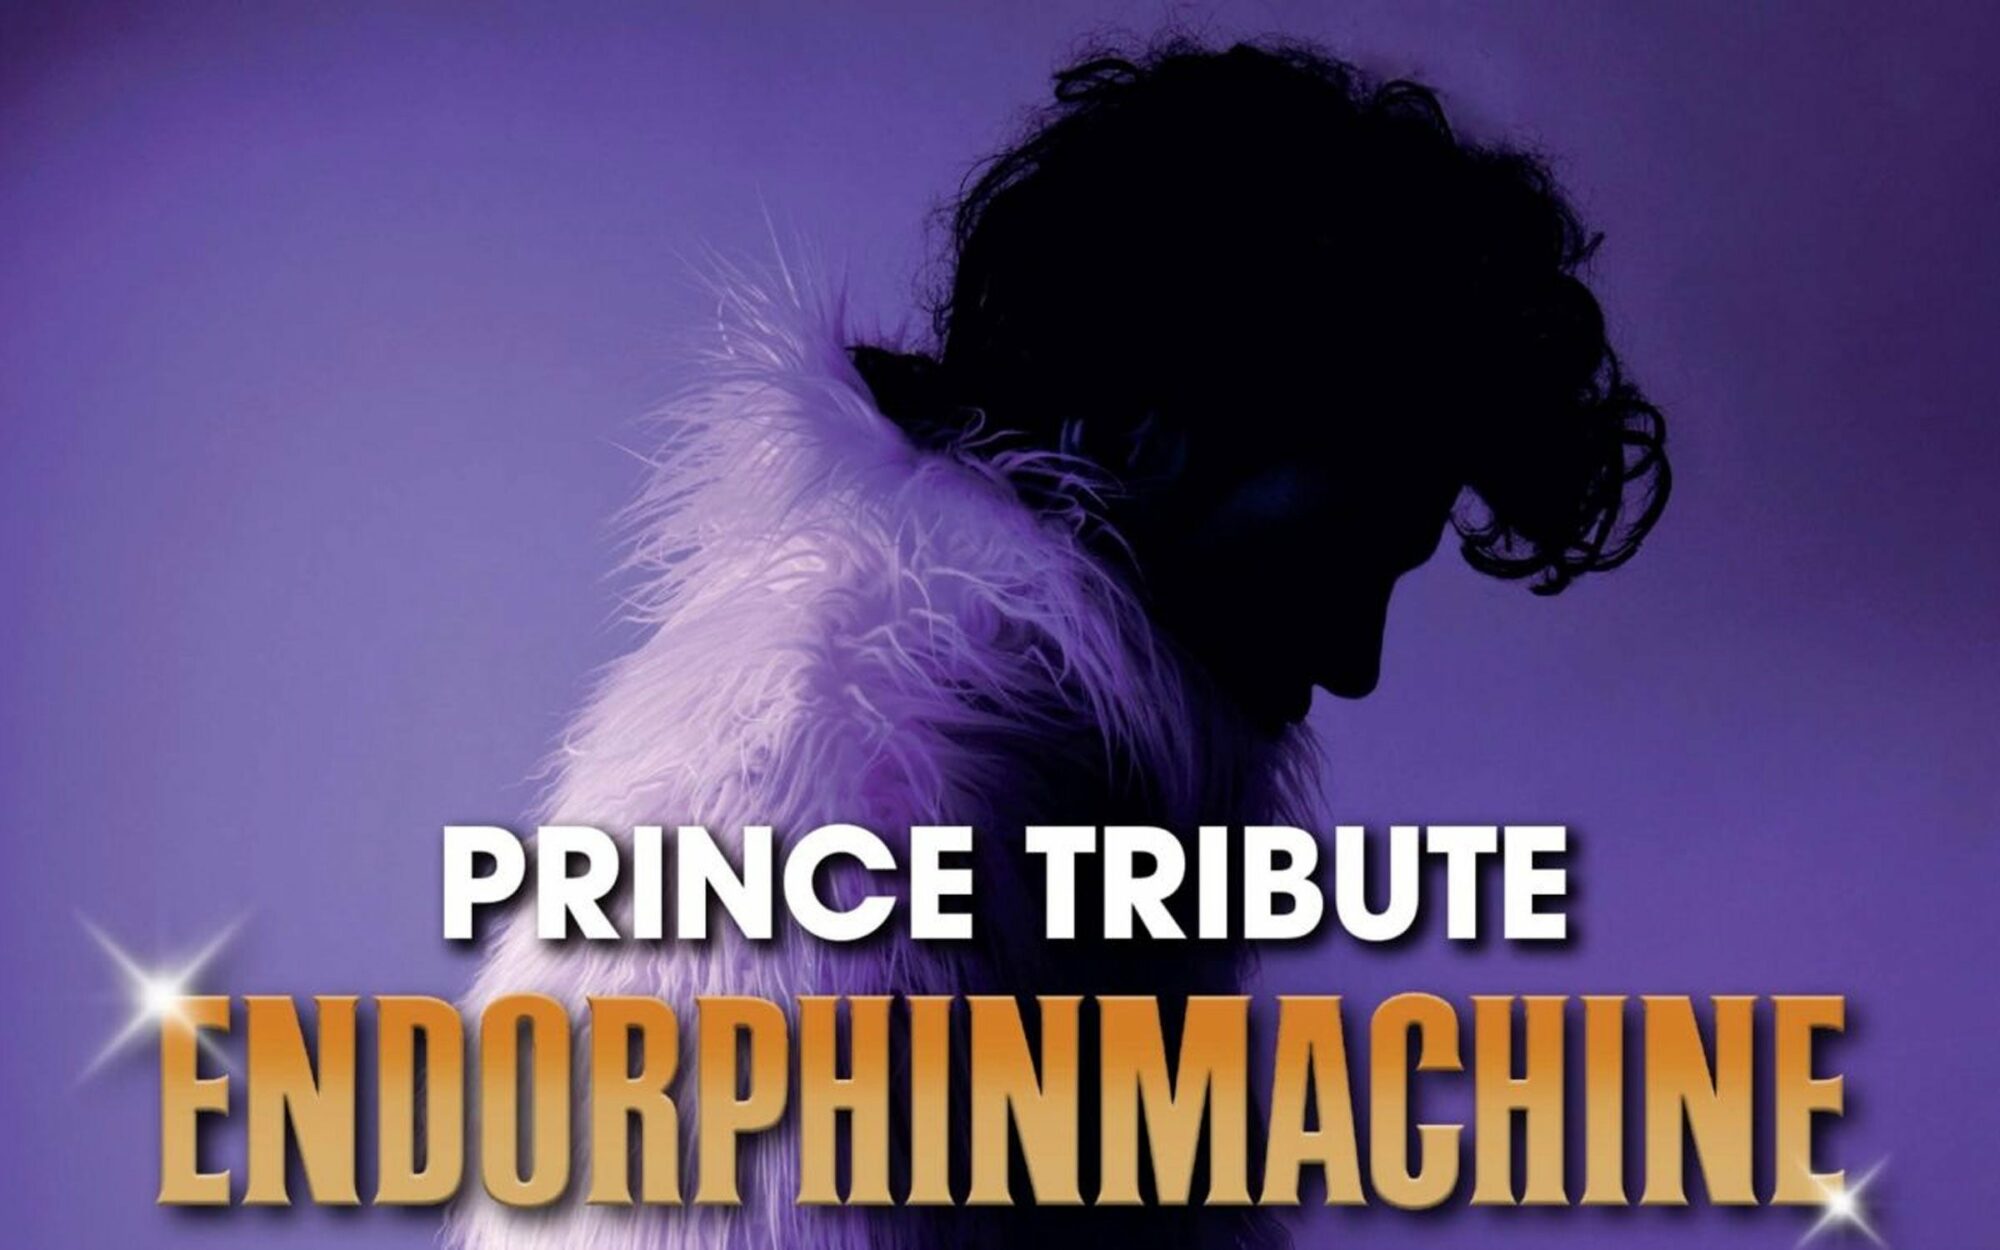 Image name Prince Tribute Endorphinmachine at O2 Academy2 Sheffield Sheffield the 30 image from the post Prince Tribute... Endorphinmachine at O2 Academy2 Sheffield, Sheffield in Yorkshire.com.